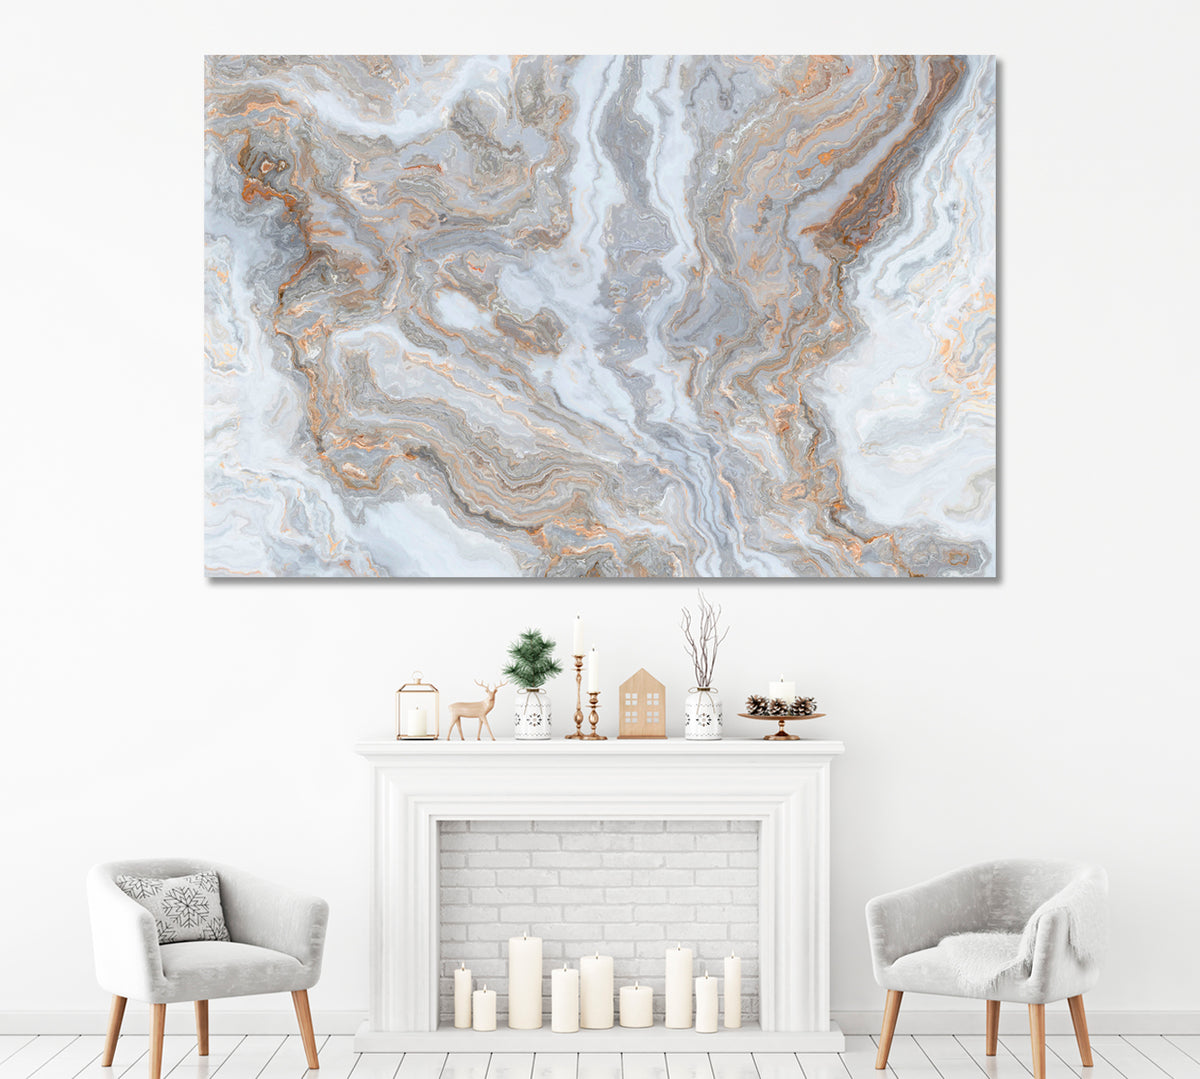 Gray-Beige Marble Canvas Print ArtLexy 1 Panel 24"x16" inches 